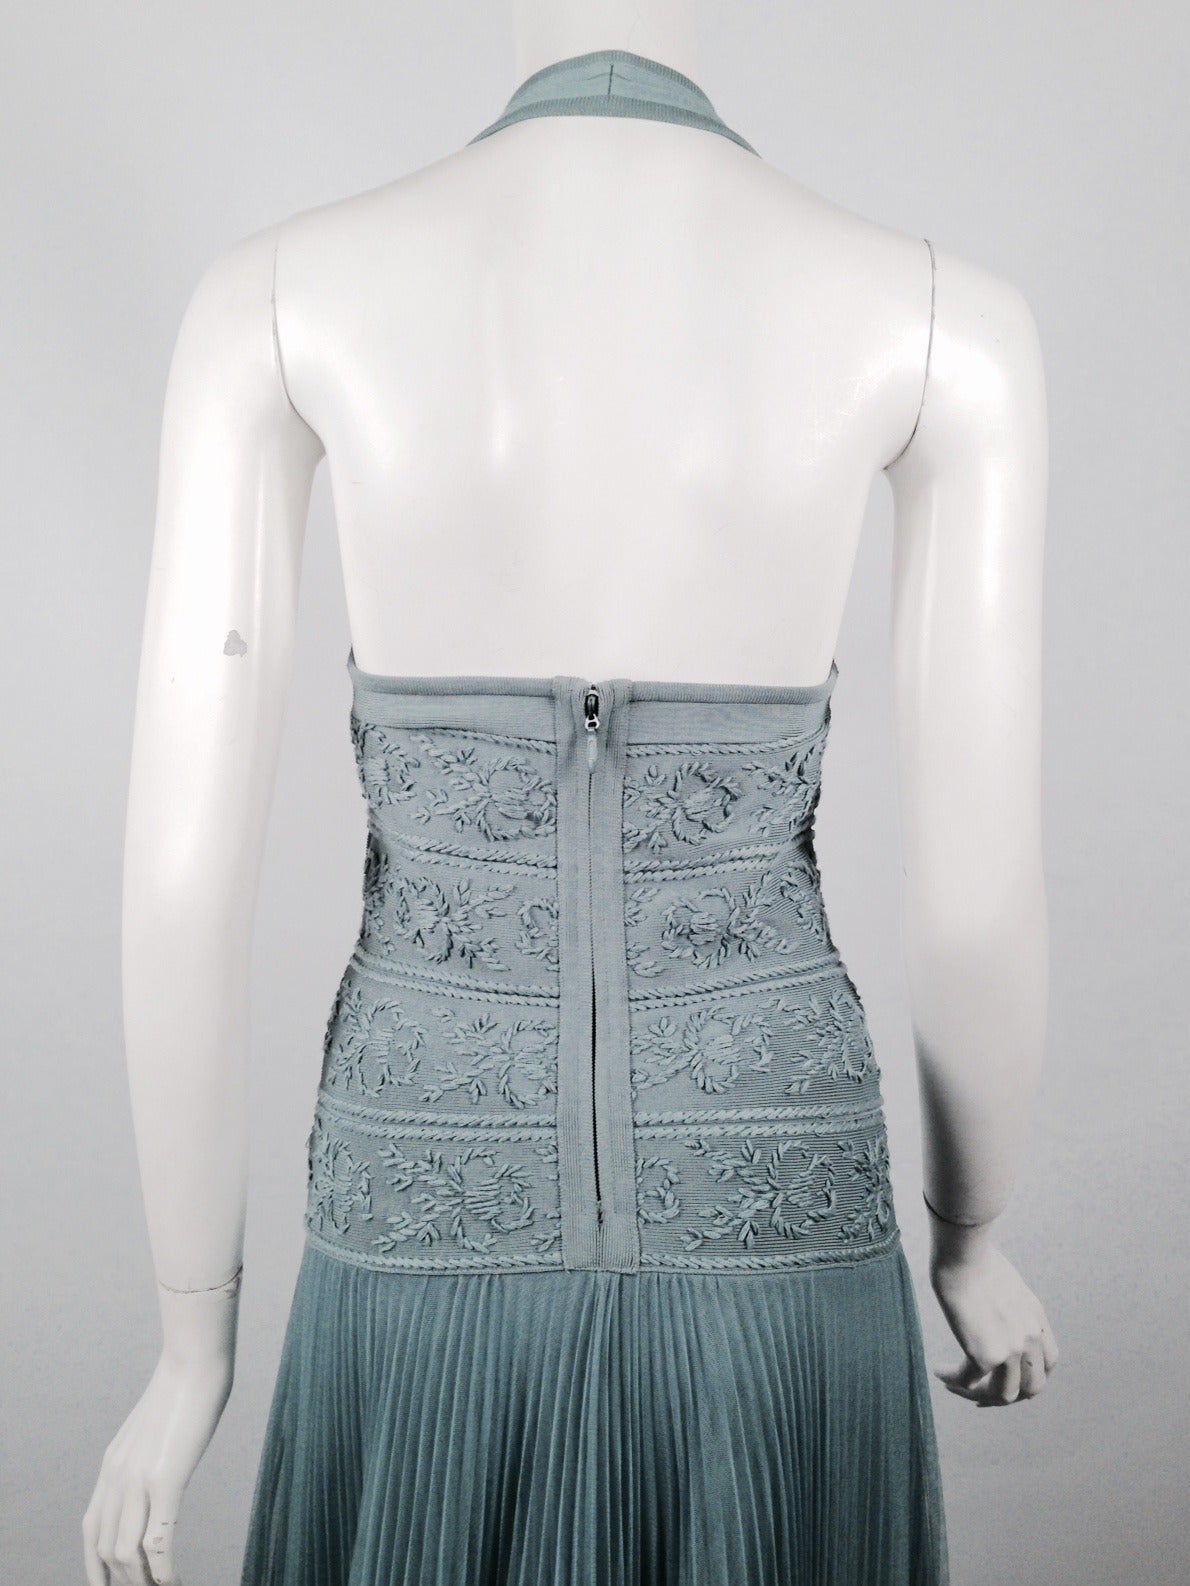 Herve Leger Gown With Embroidered Bodice and Knife Pleated Full Skirt In Excellent Condition For Sale In Palm Beach, FL